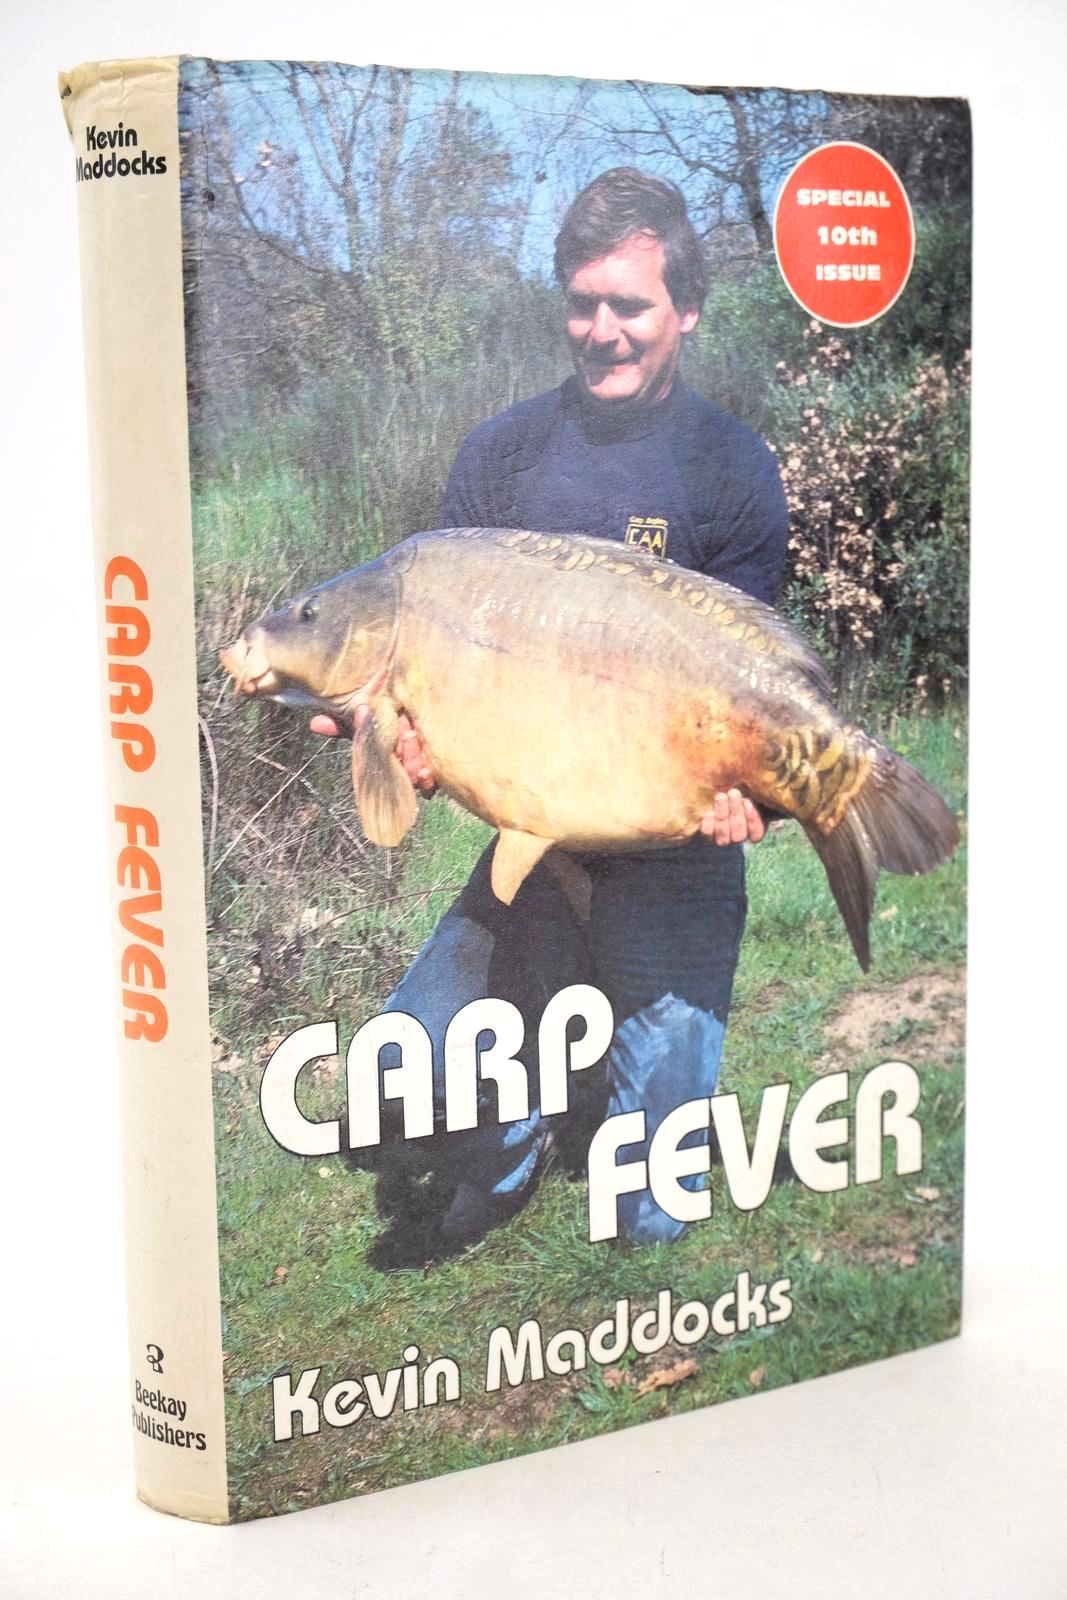 Photo of CARP FEVER written by Maddocks, Kevin published by Beekay Publishers (STOCK CODE: 1327658)  for sale by Stella & Rose's Books